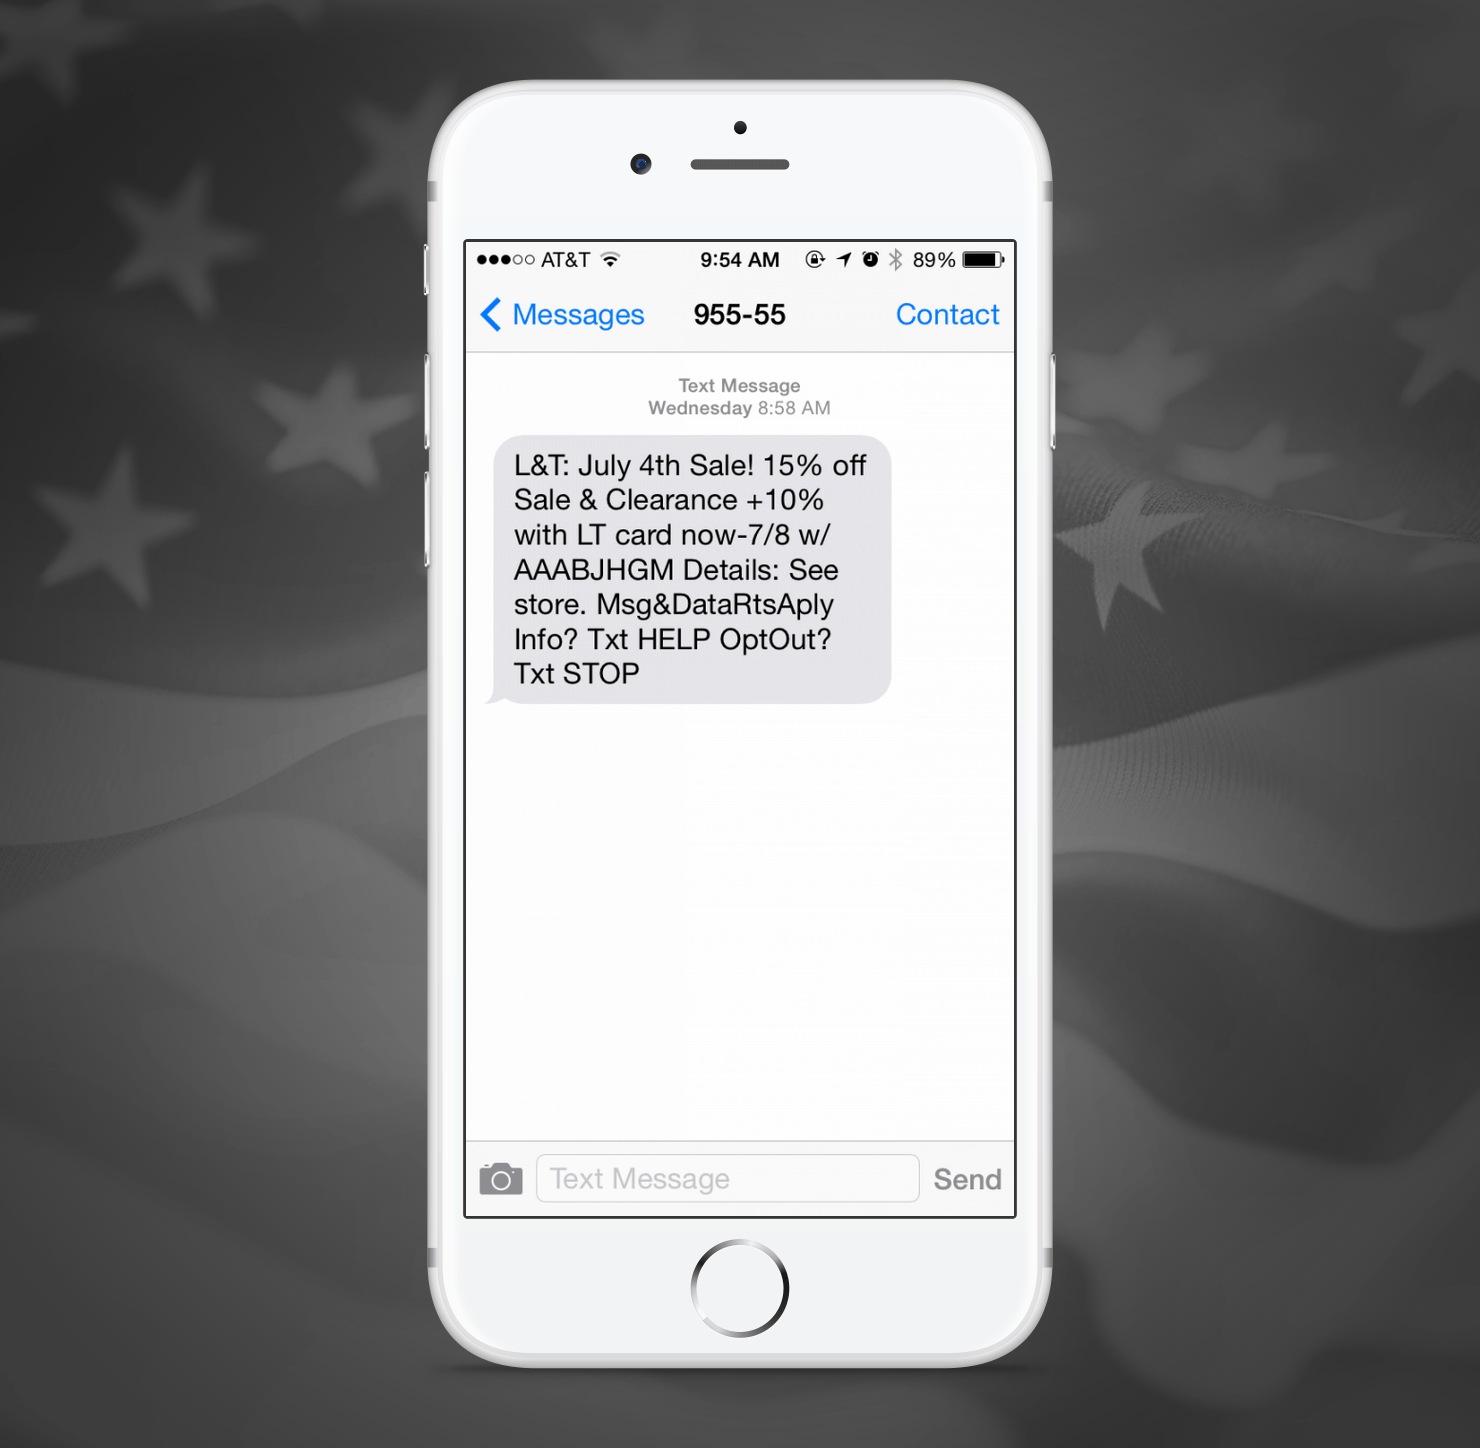 Lord and Taylor SMS Promotion Example from Independence Day